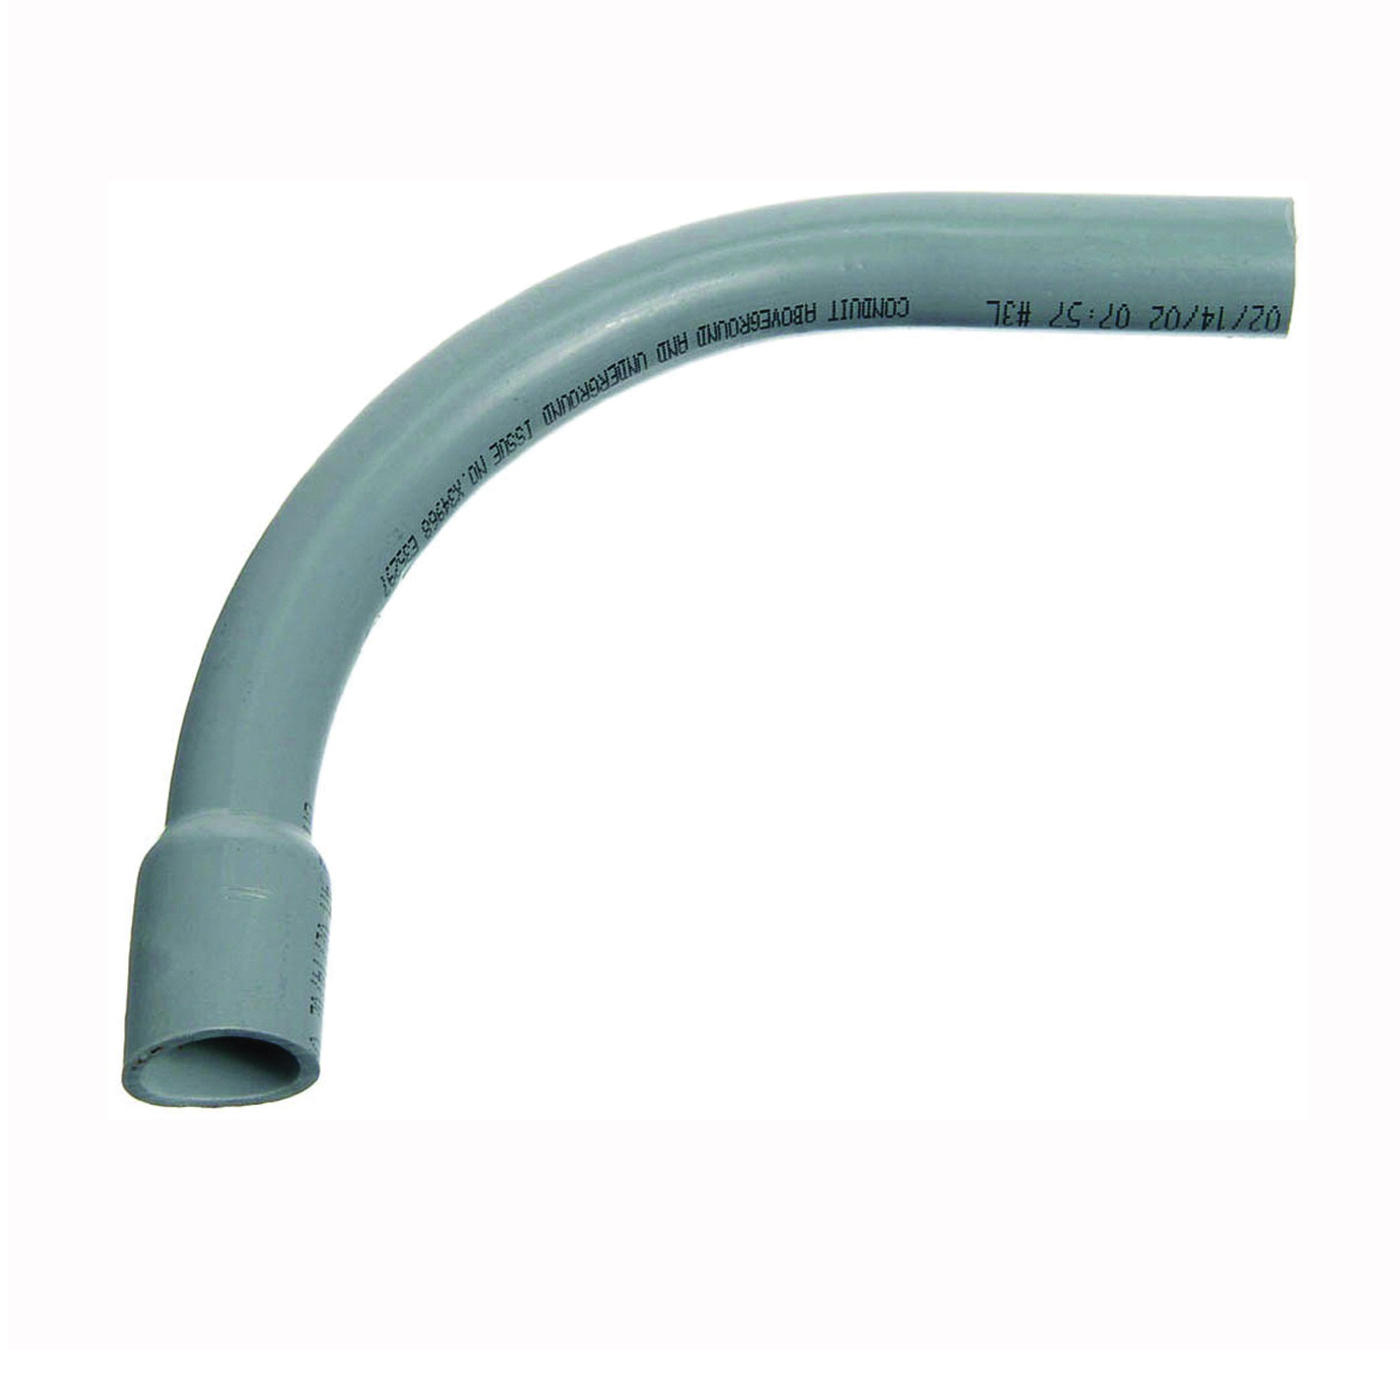 UA9AGB-CTN Elbow, 1-1/4 in Trade Size, 90 deg Angle, SCH 80 Schedule Rating, PVC, Bell End, Gray